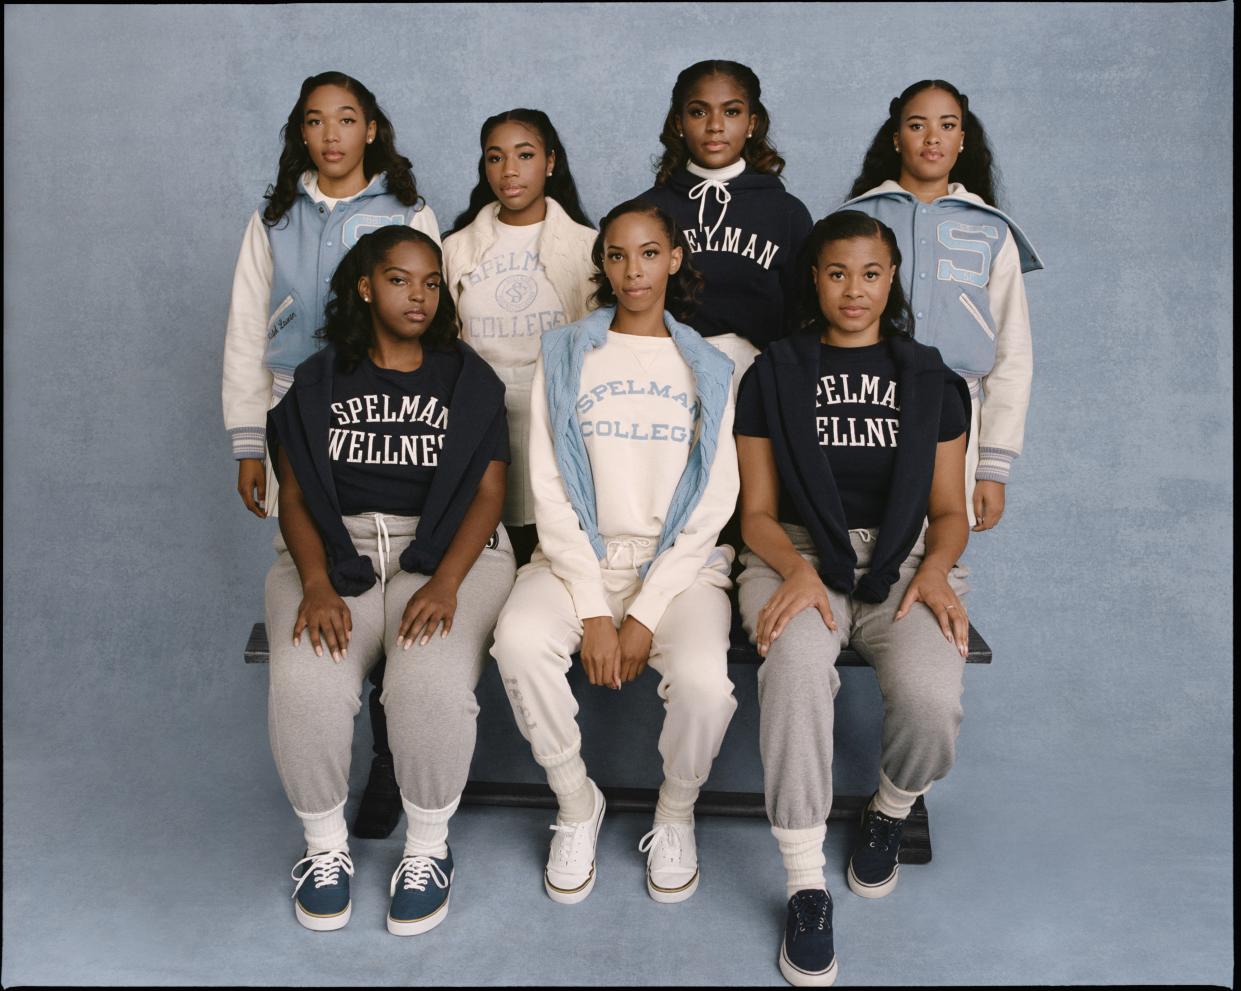 The latest Polo Ralph Lauren collection draws inspiration from HBCUs. (Photo: Nadine Ijewere/Polo Ralph Lauren)